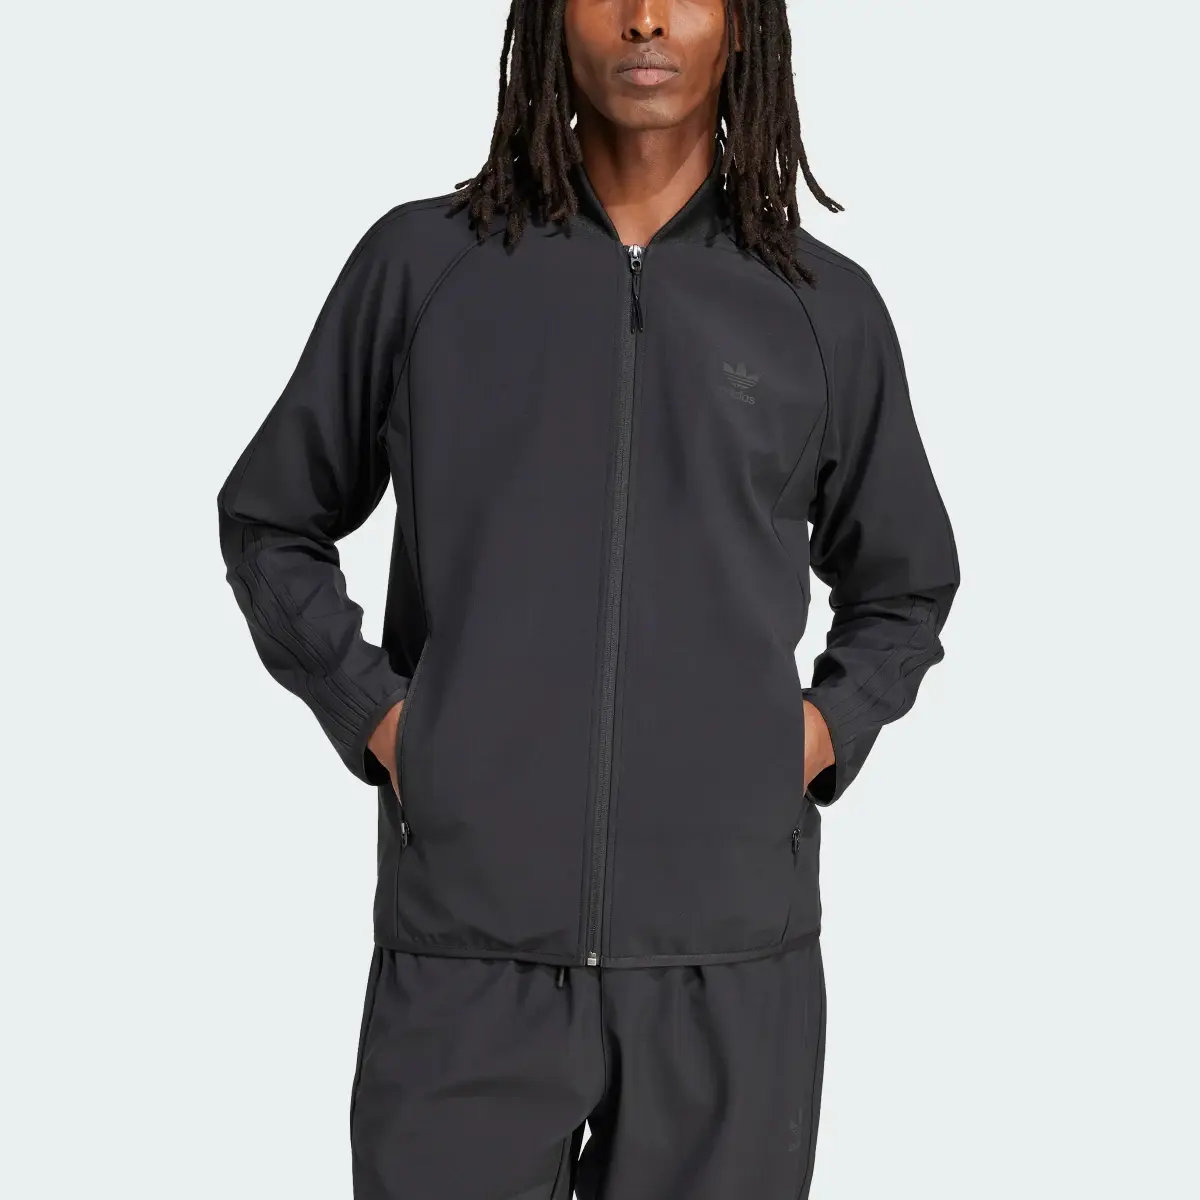 Adidas Track top SST Bonded. 1